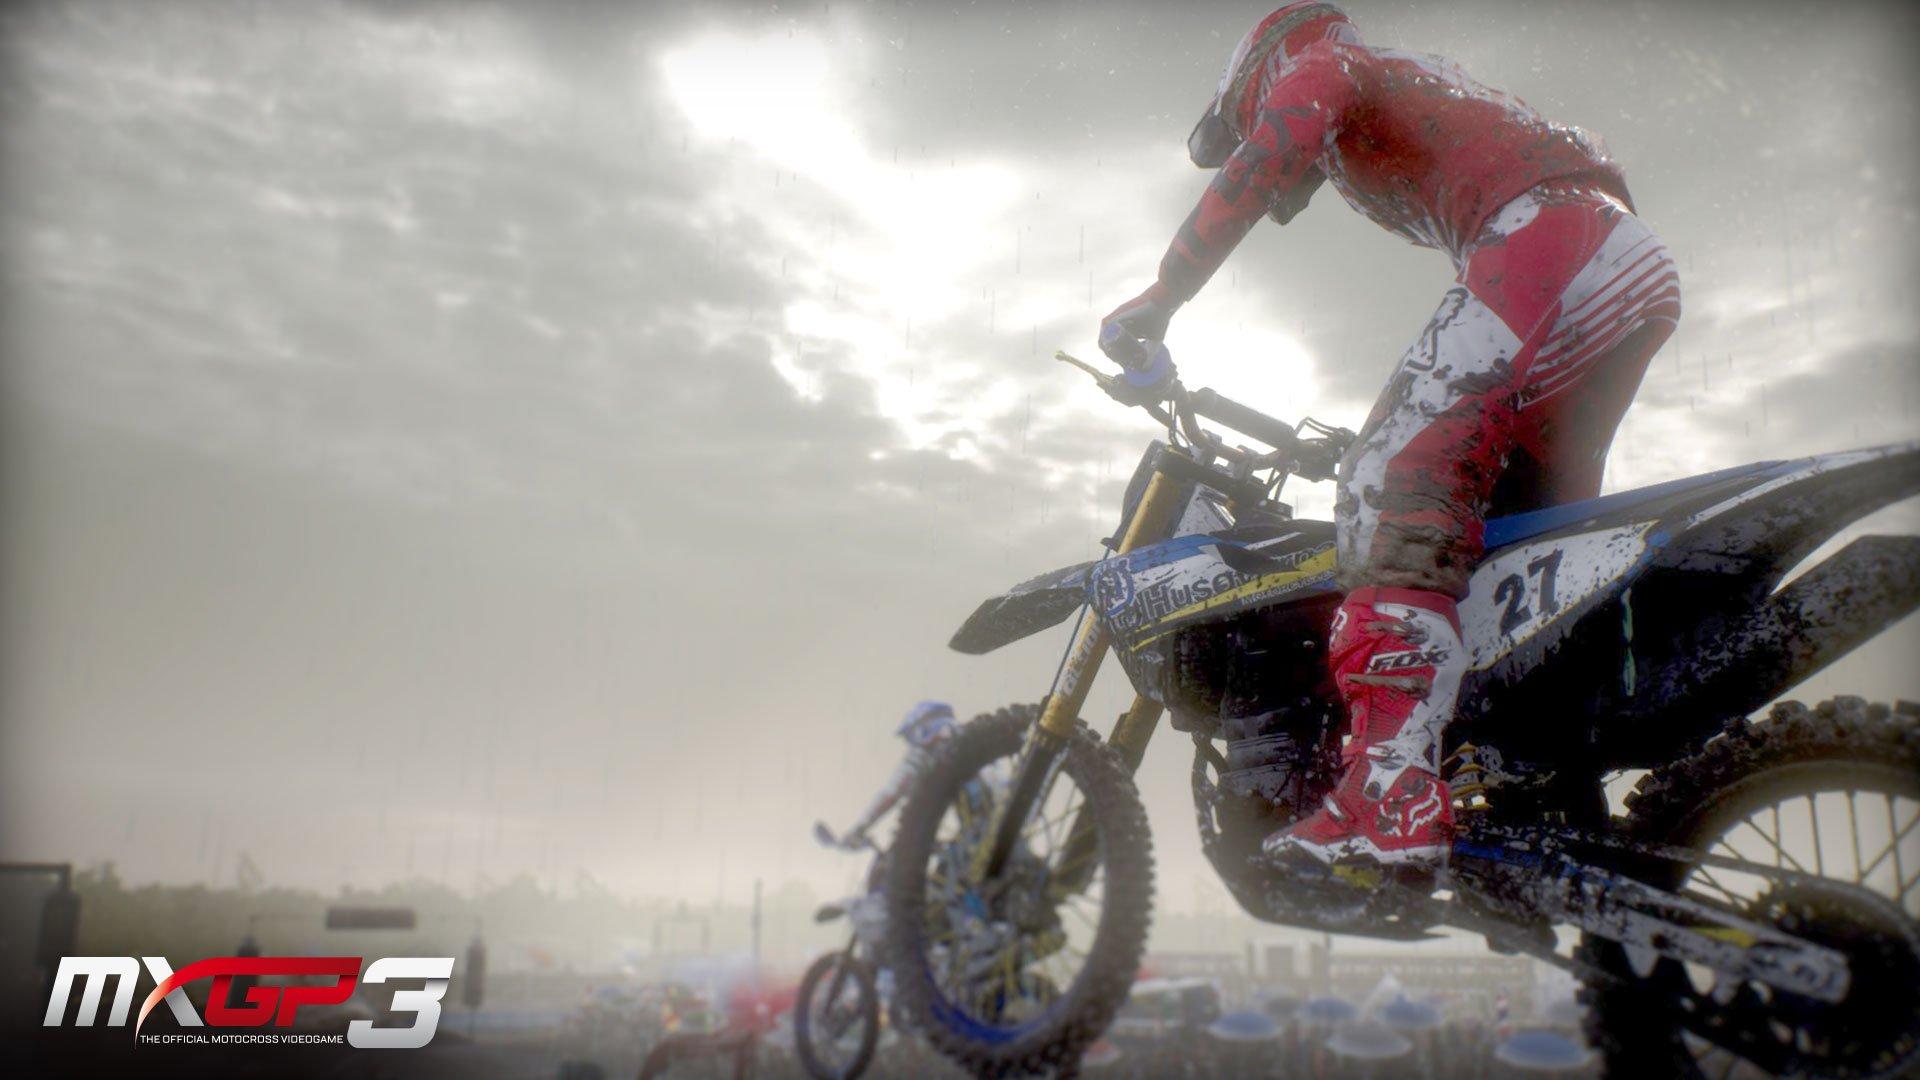 MXGP3 - The Official Motocross Videogame (PS4)